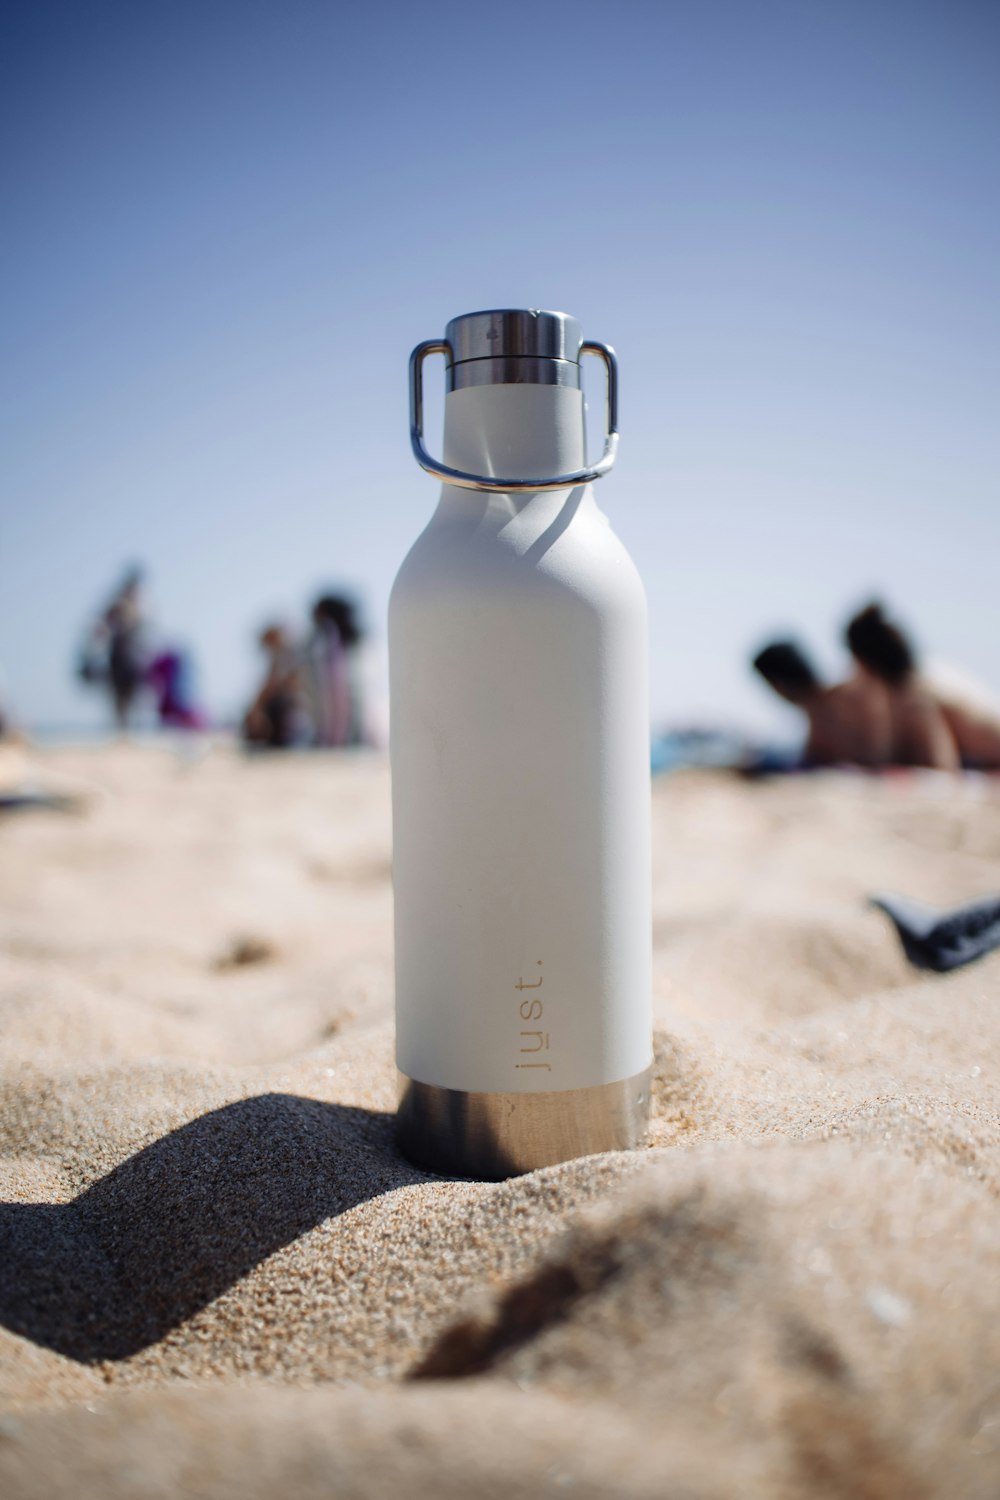 white and silver bottle on brown sand during daytime